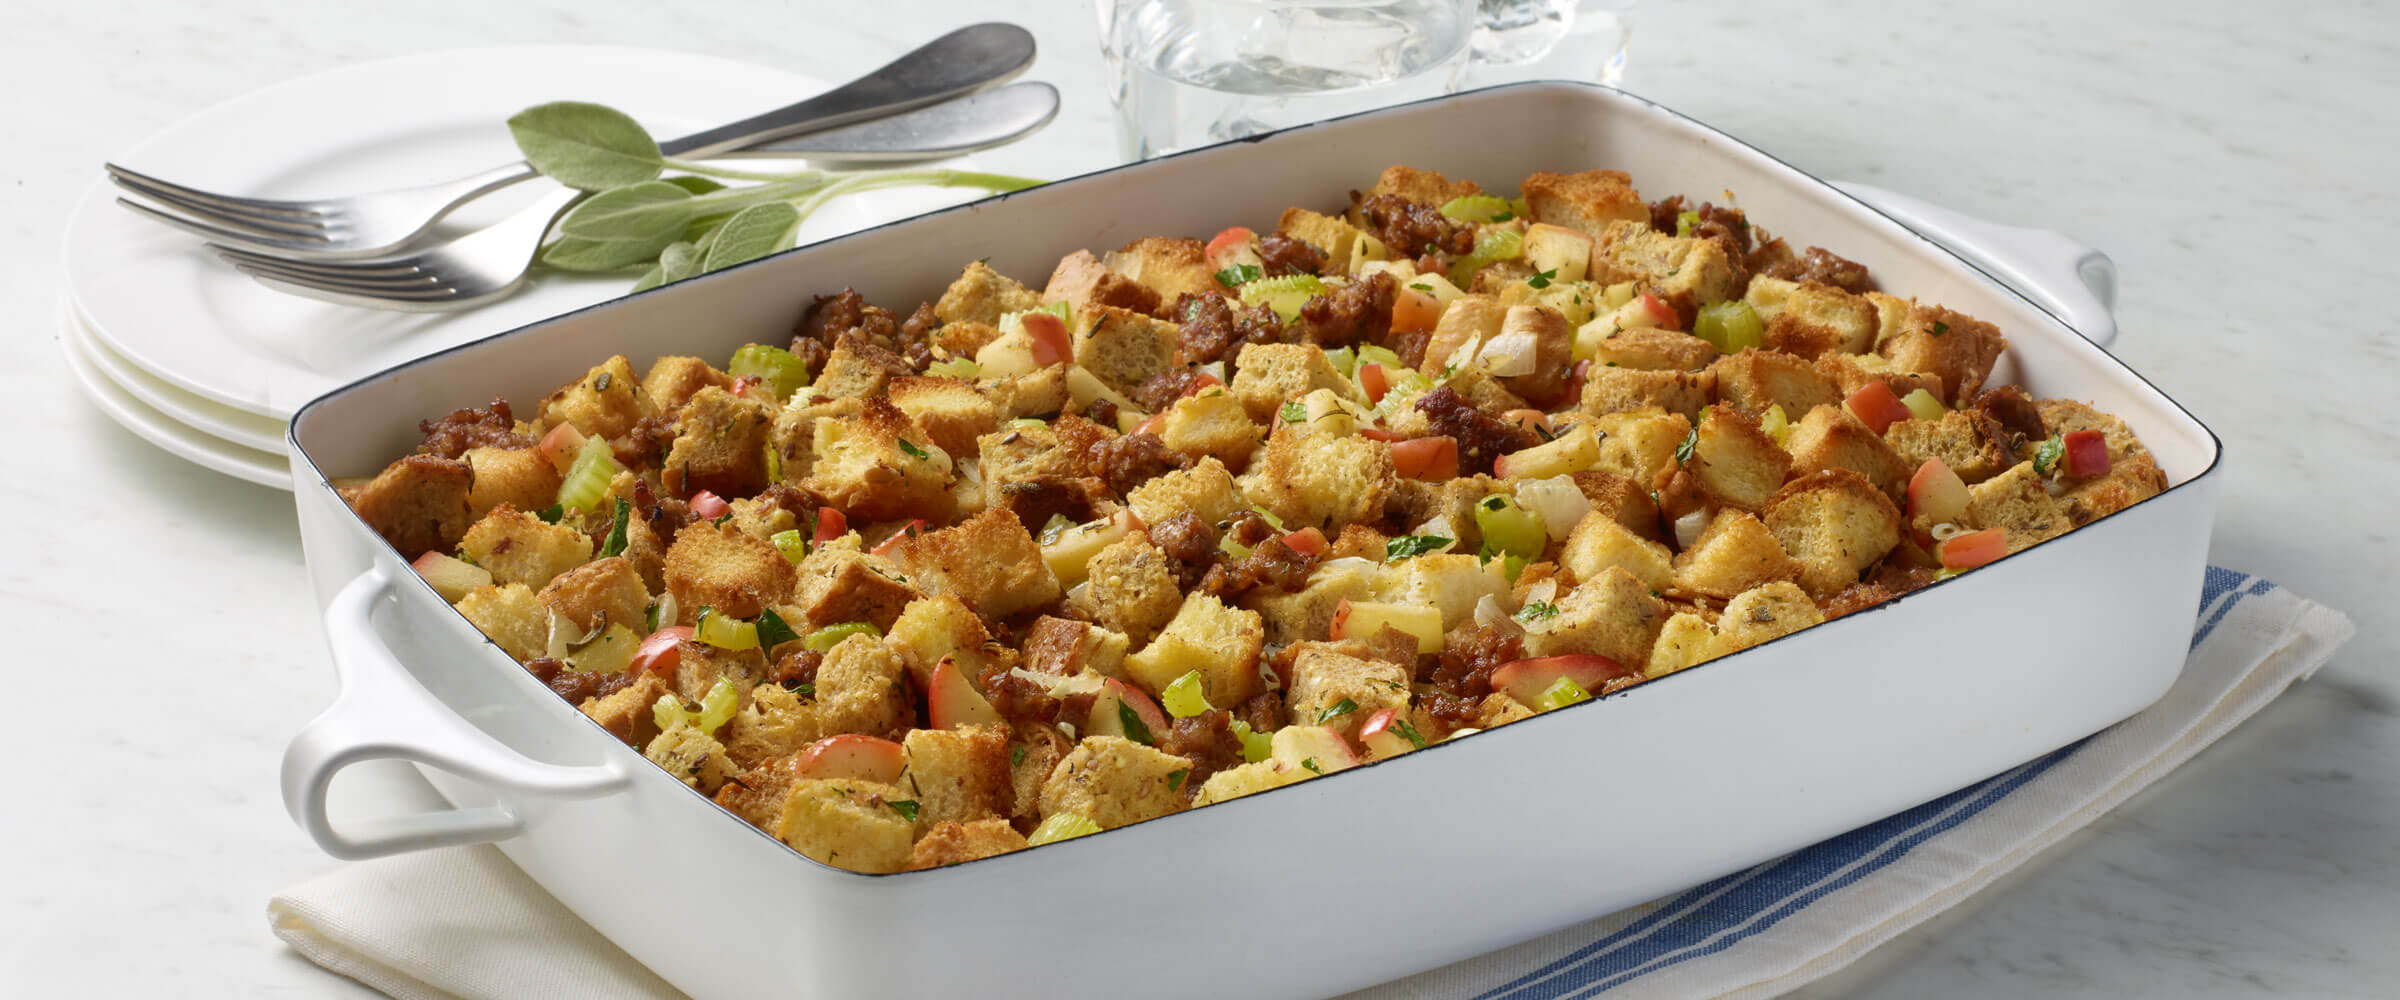 Sausage and Herb Stuffing in white dish with serving plates on the side